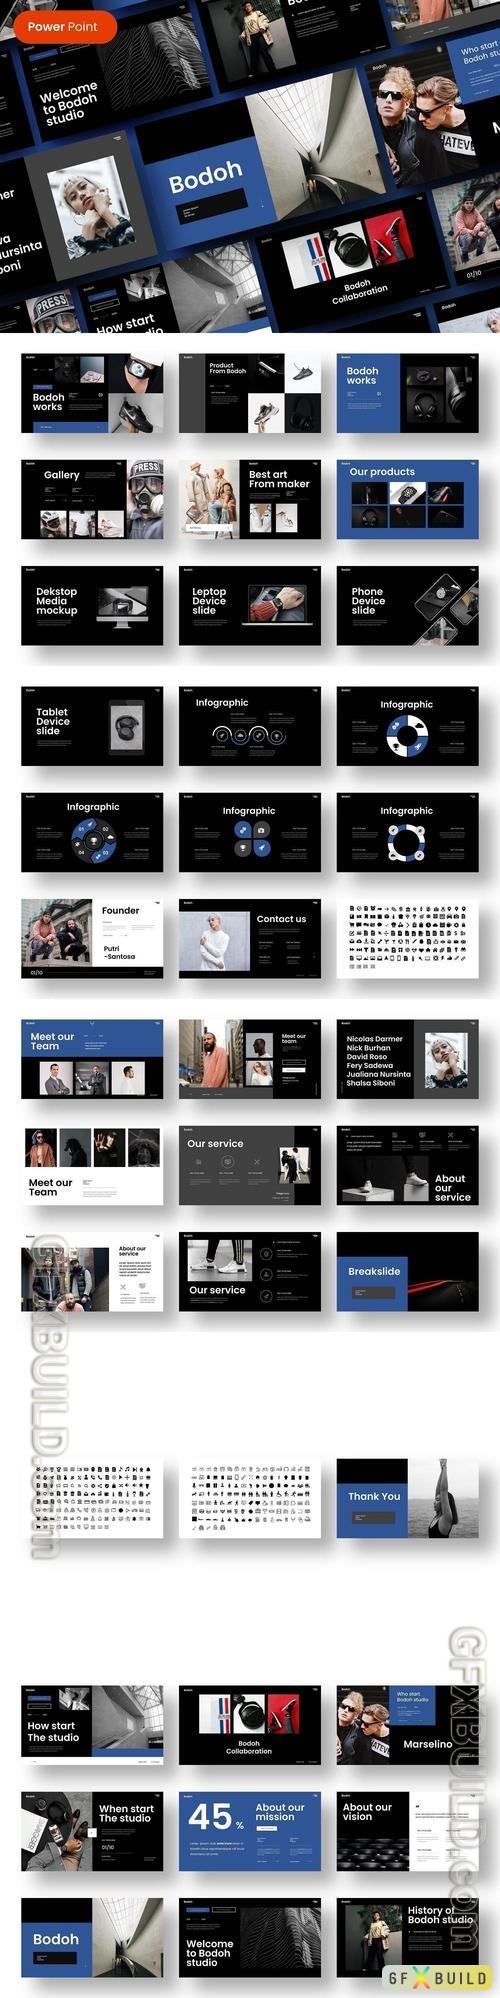 Bodoh - Business PowerPoint Template